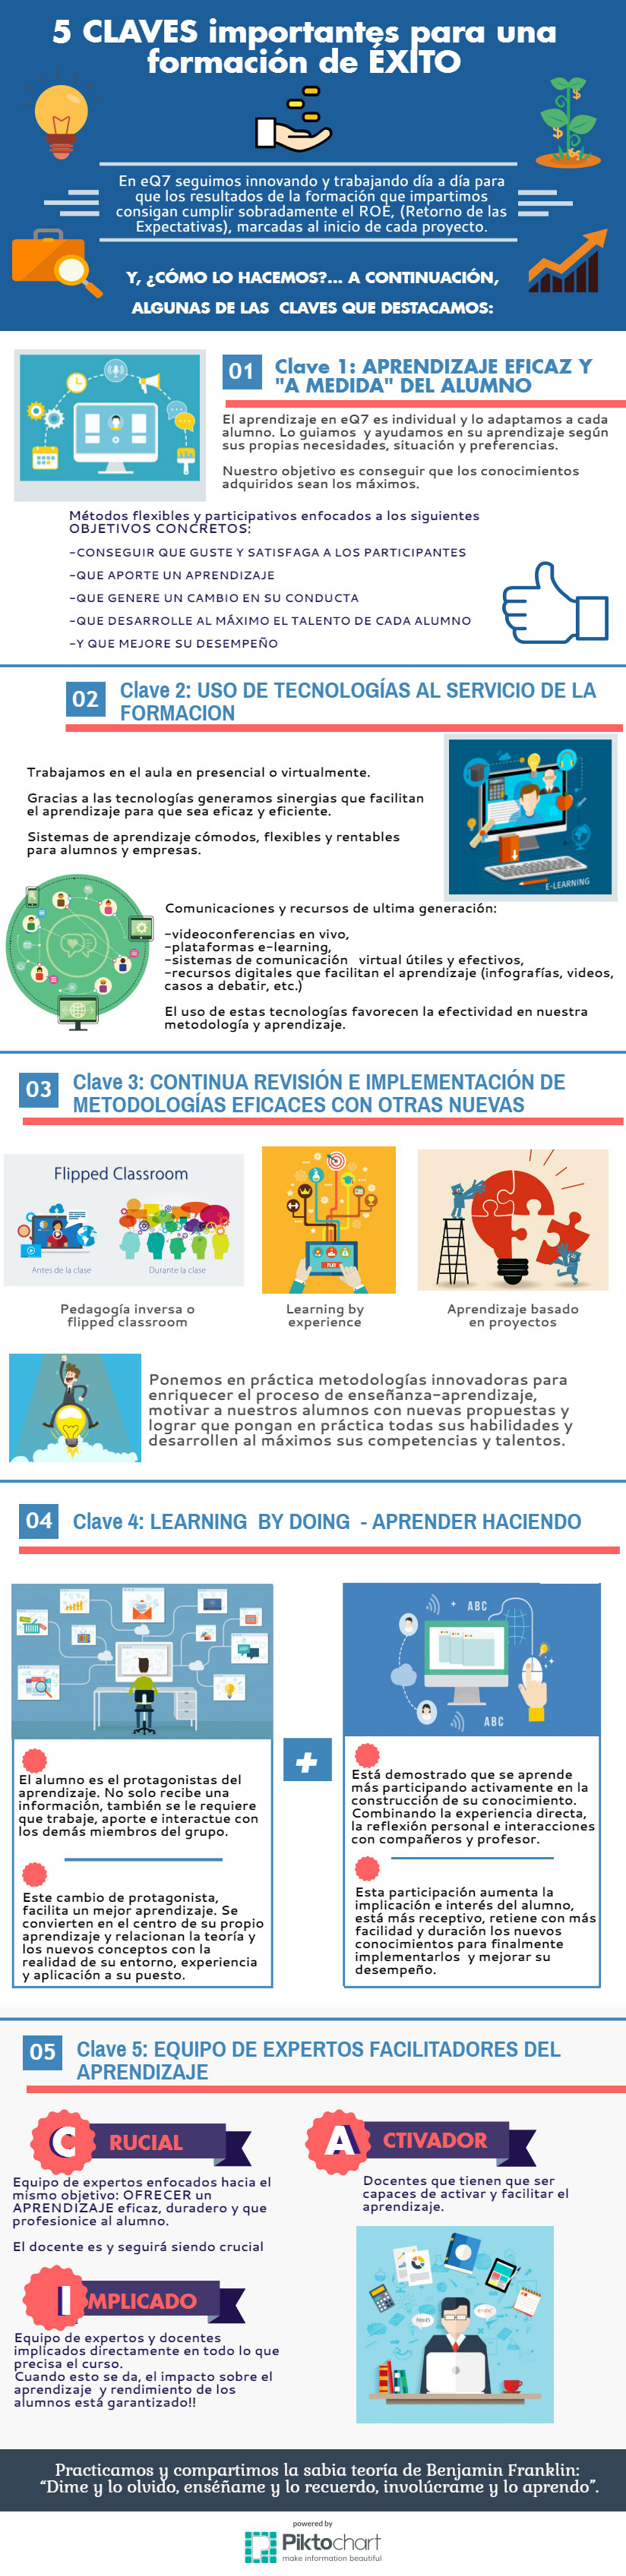 5-CLAVES